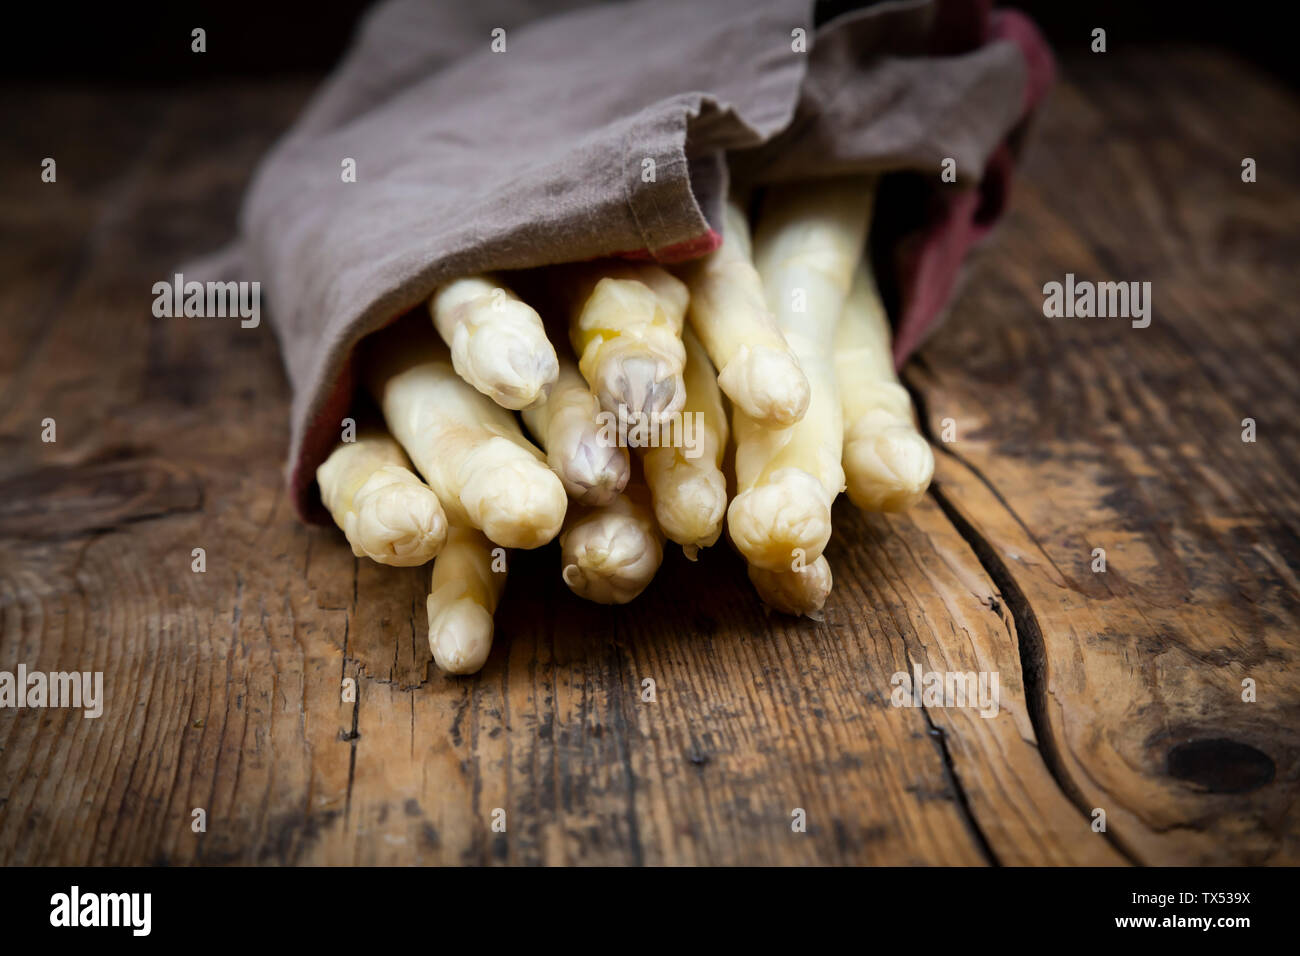 Bunch of white asparagus, kitchen towel Stock Photo